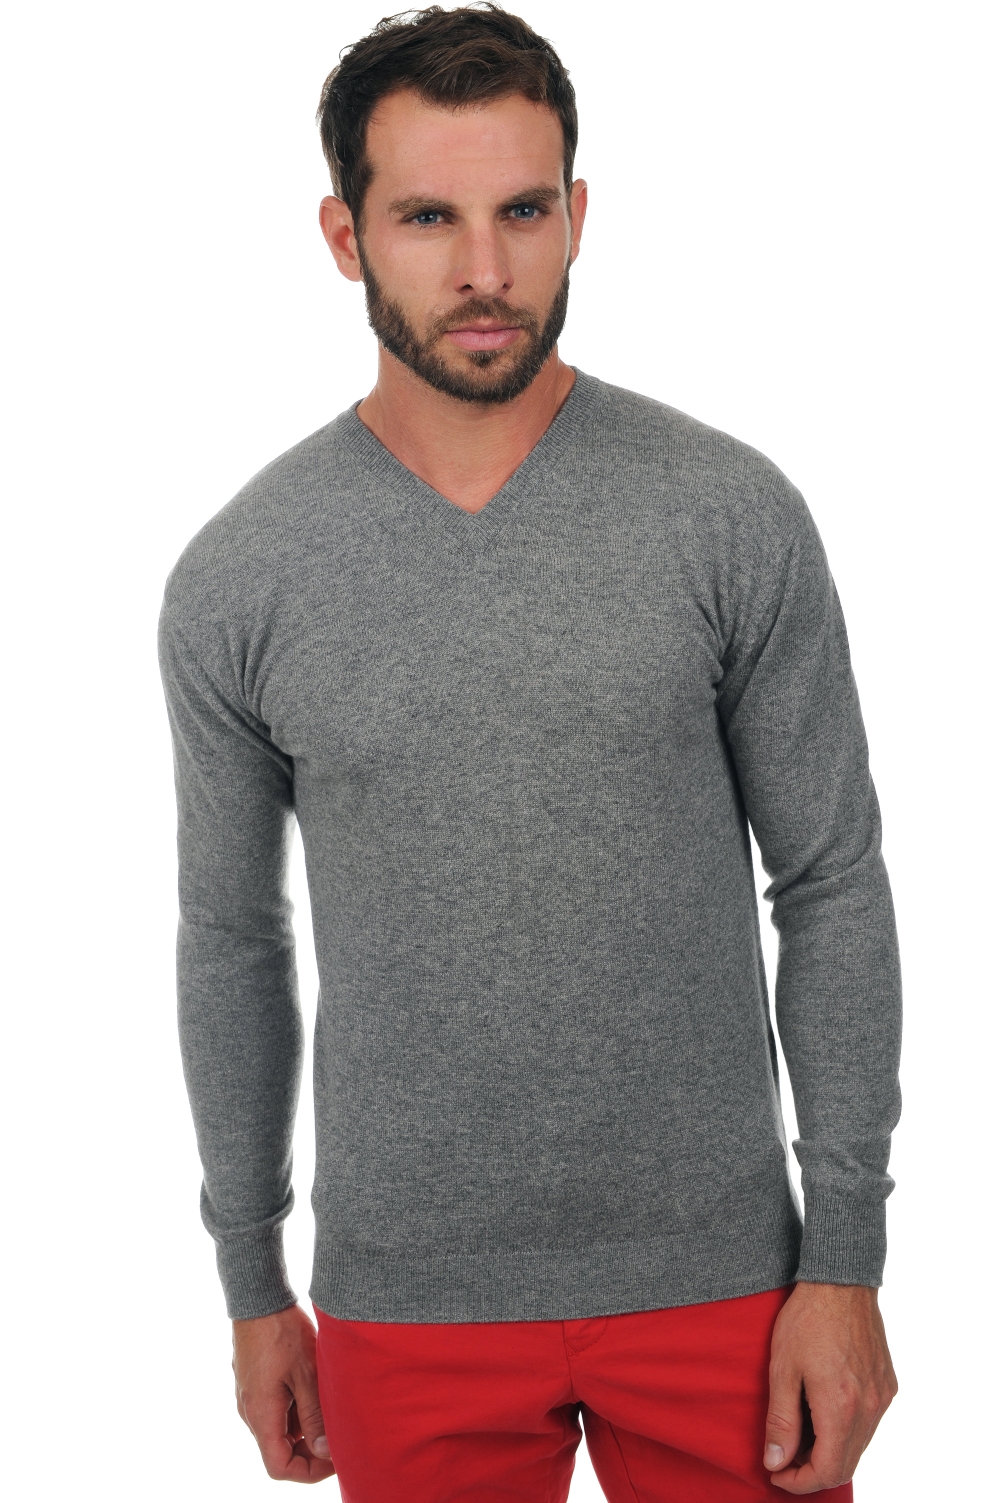 Cachemire pull homme col v maddox gris chine s